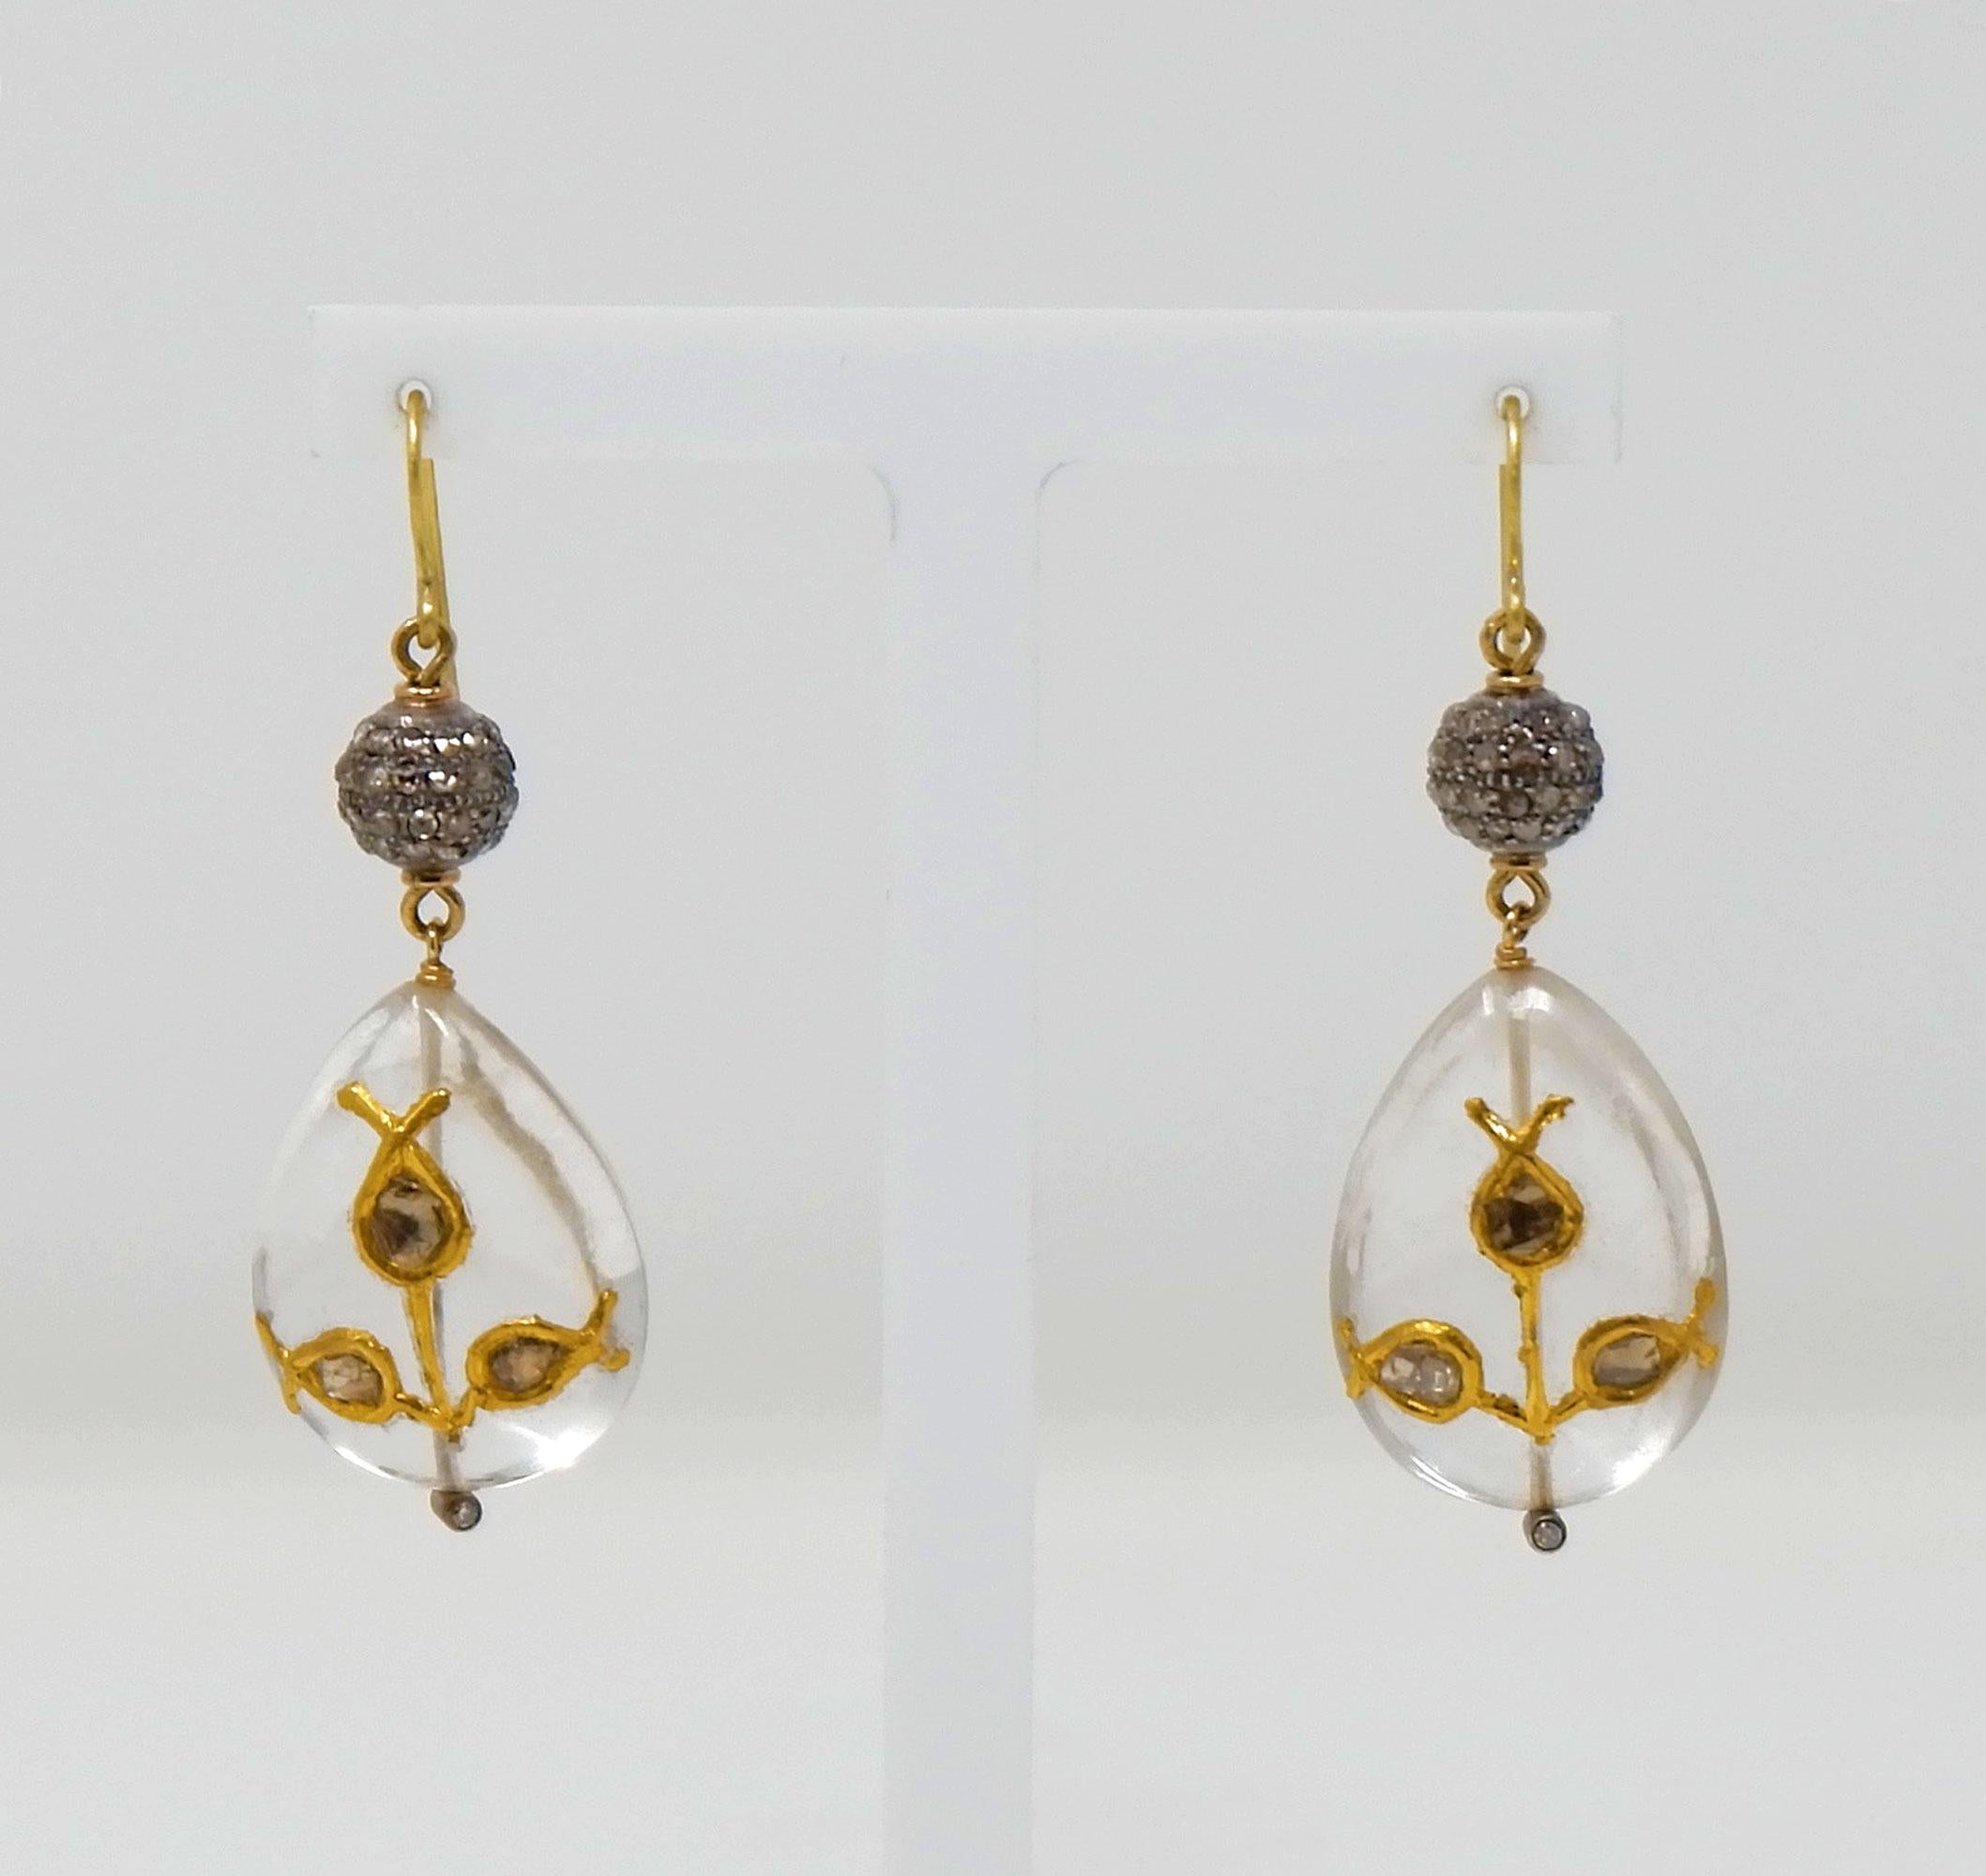 A pair of charming, hand made 18 karat gold and silver diamond earrings. Two unusual and precious rock crystal drops are set with foil backed Indian cut diamonds in the Mughal tradition which is often seen in museums the world over. The delicate and